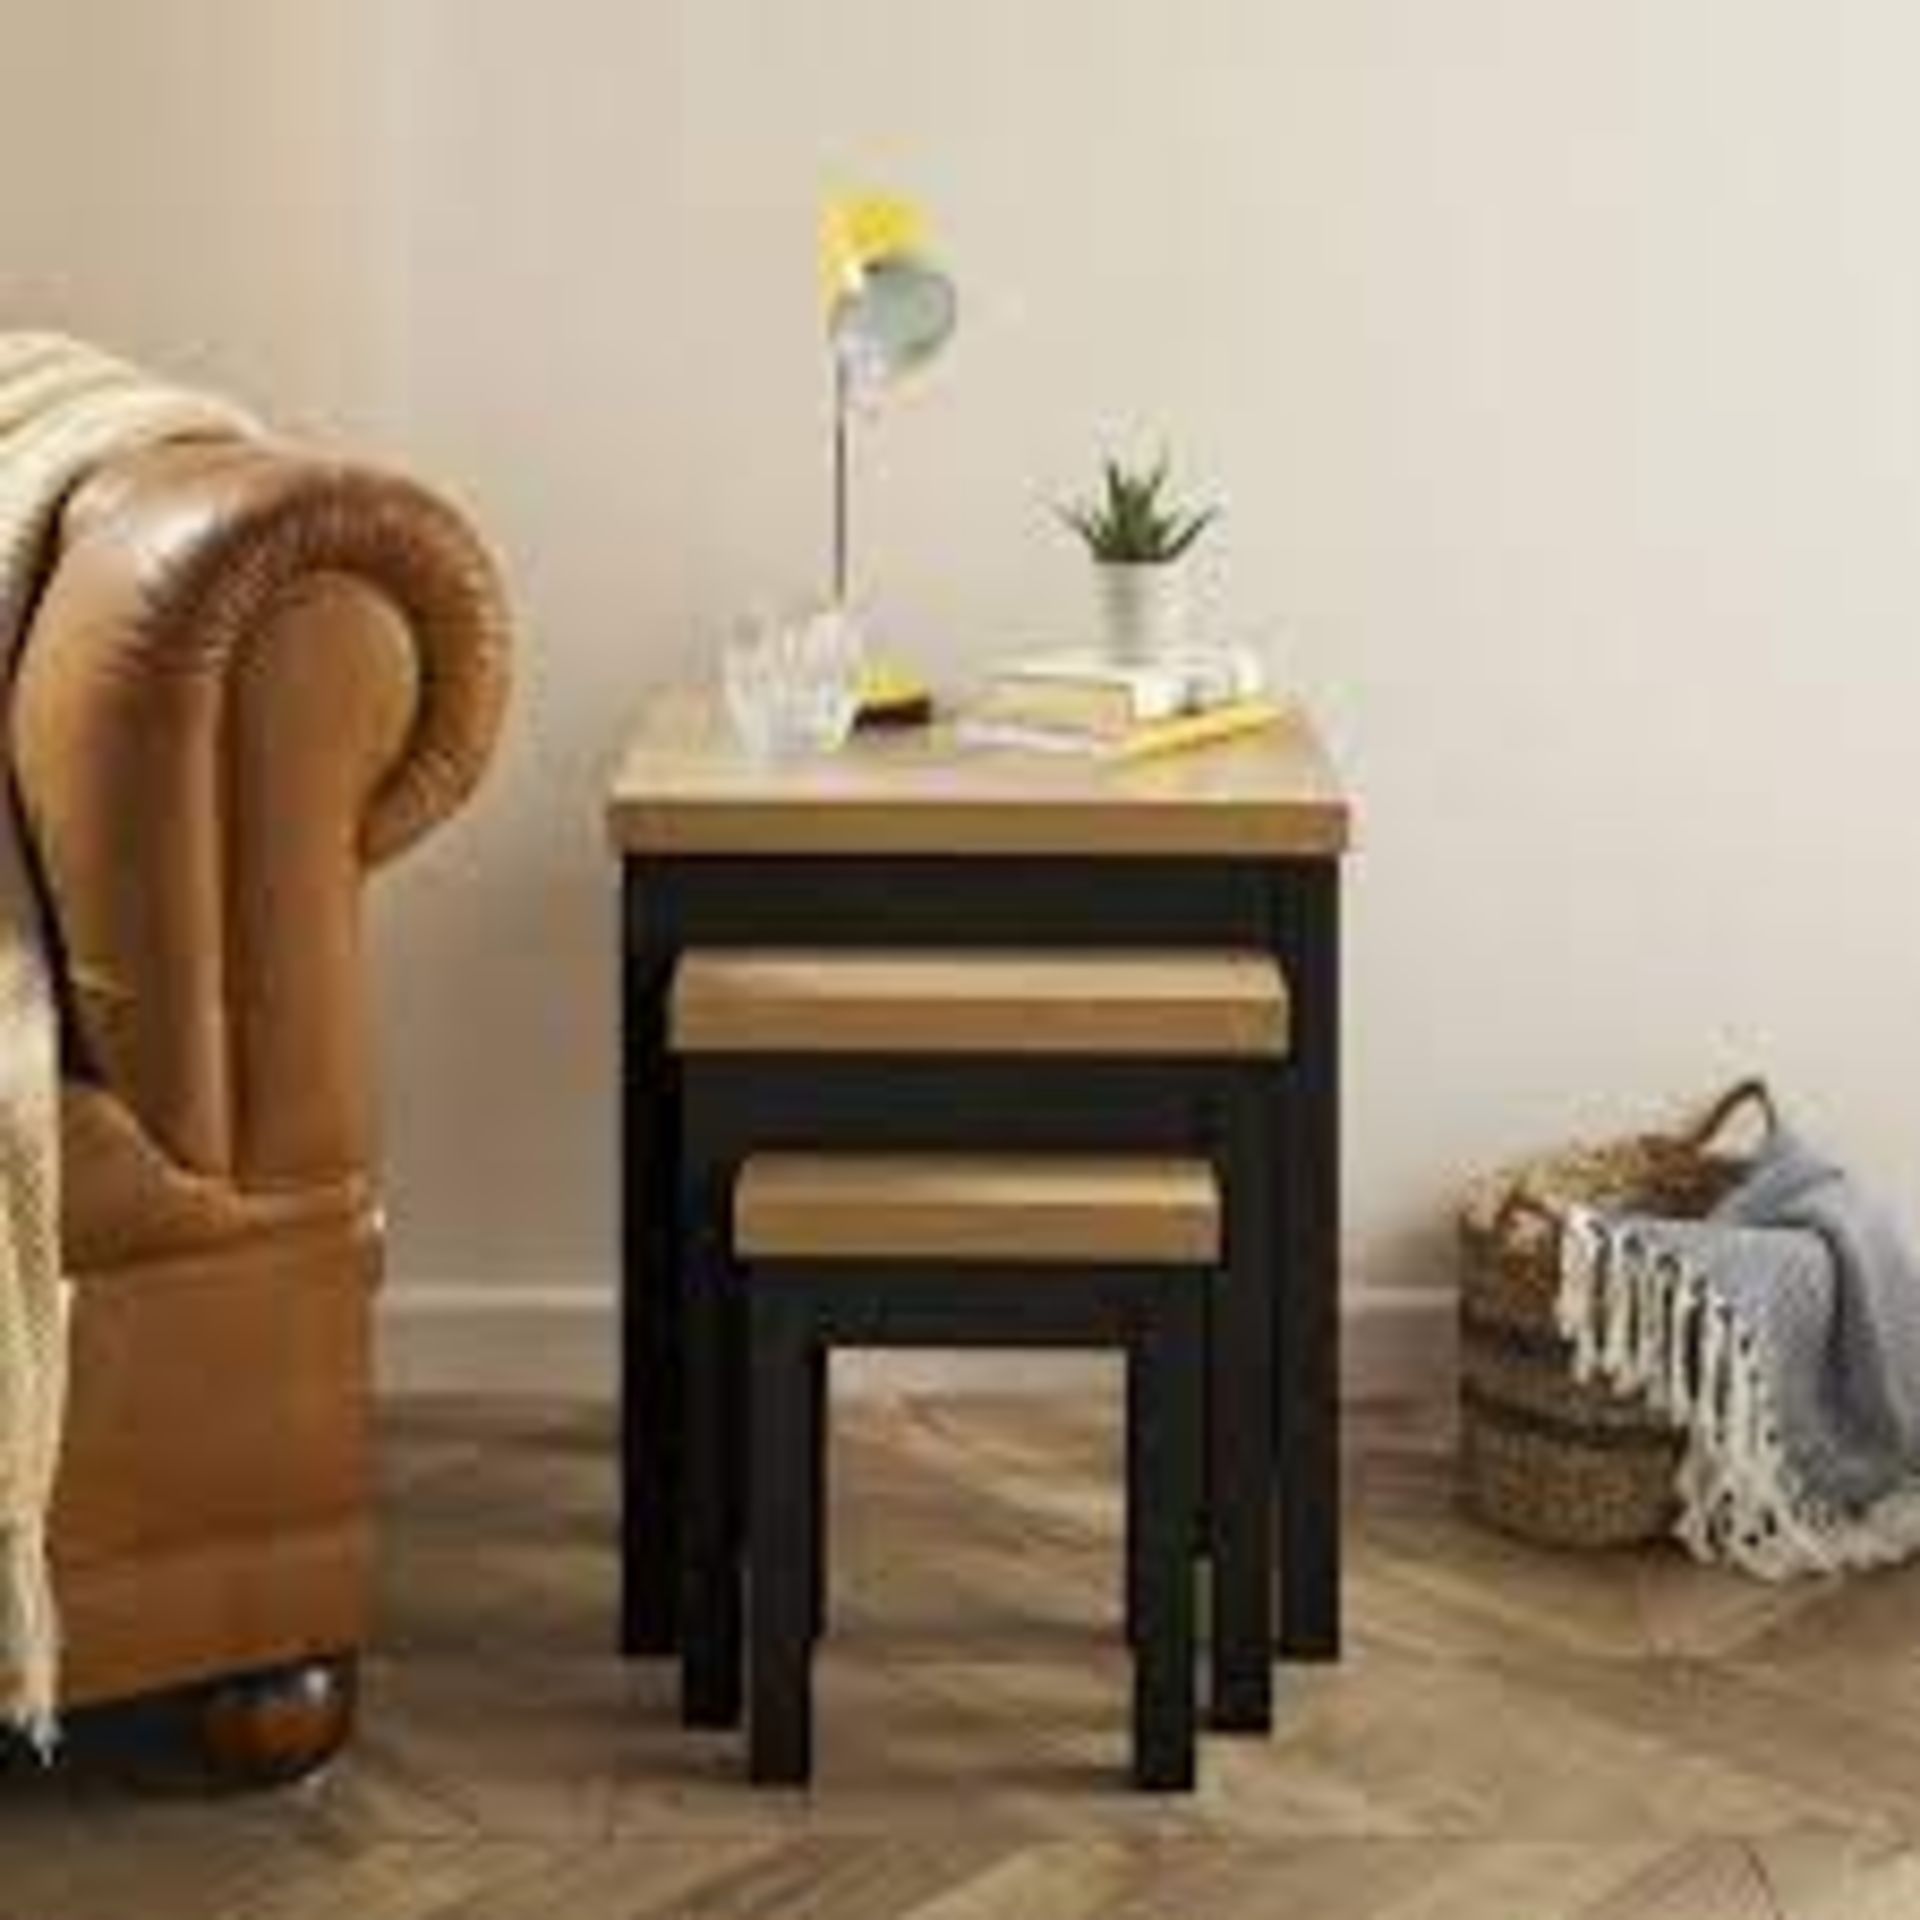 Lilsbury Black Nest of Tables - SR3. Update your living spaces by adding storage with the Lilsbury